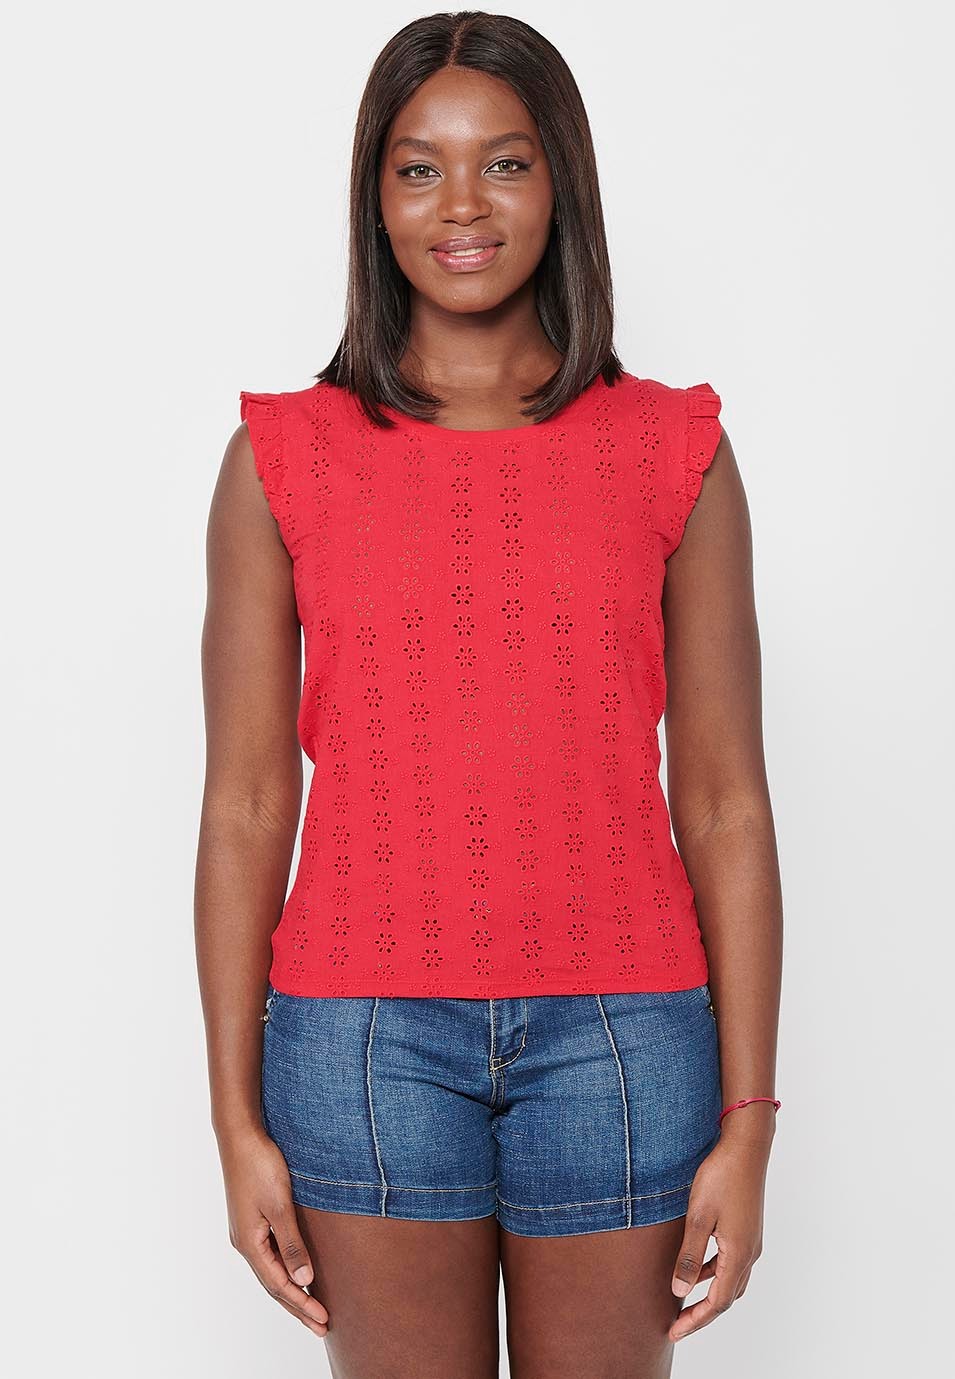 Short sleeve t-shirt, ruffle on the shoulders, red color for women